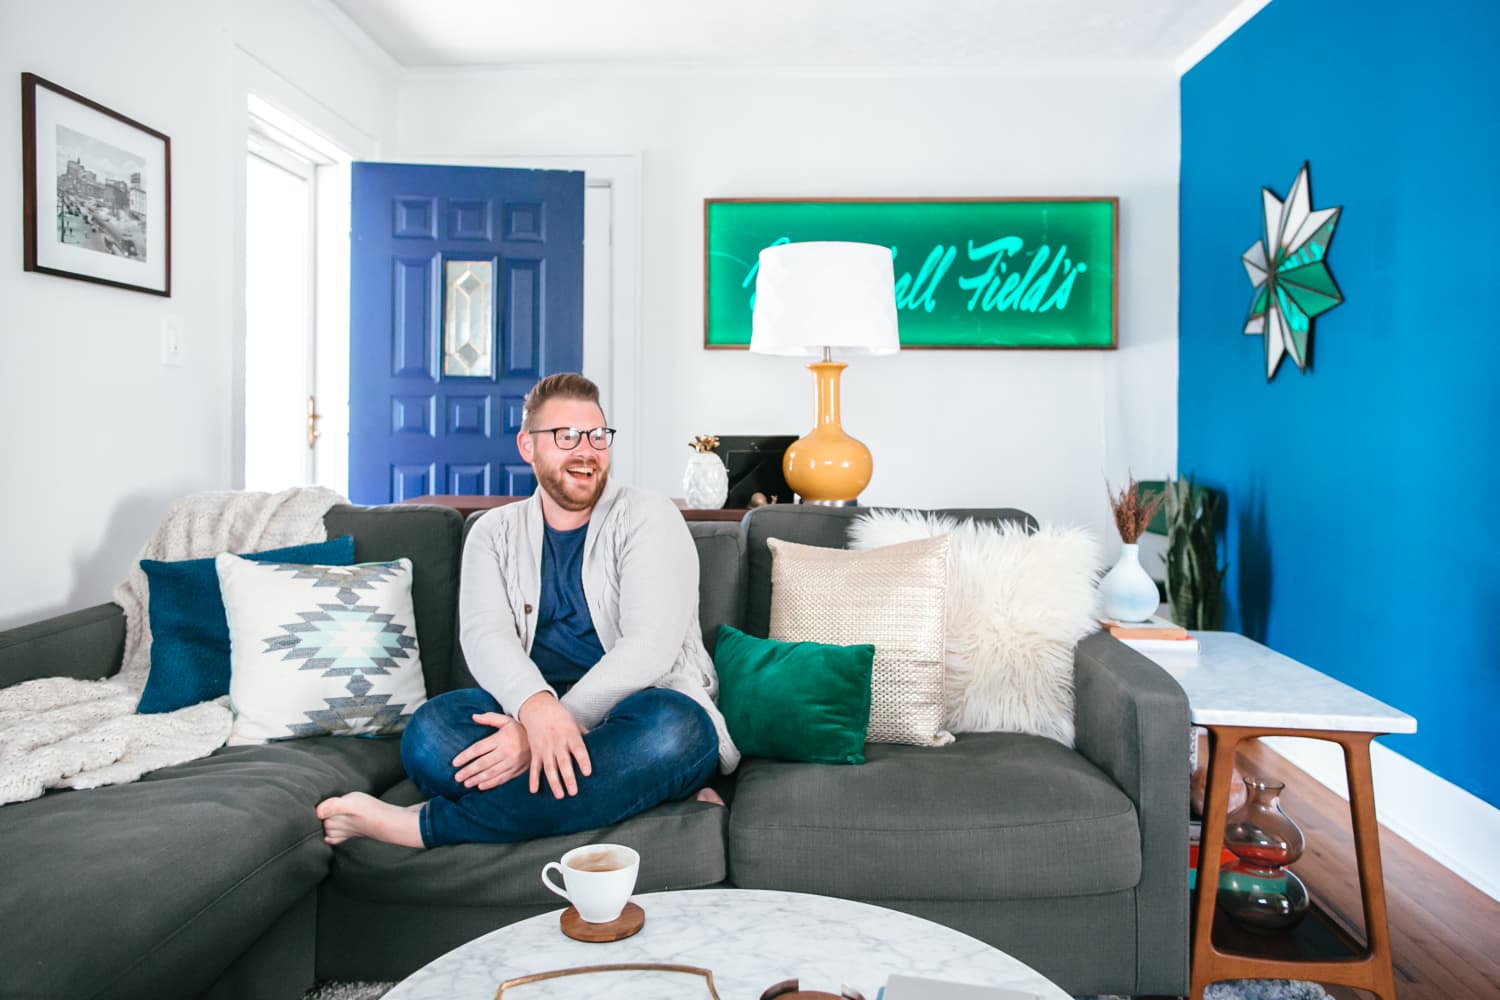 House Tour: A First-Time Home Buyer's Colorful Reno | Apartment Therapy